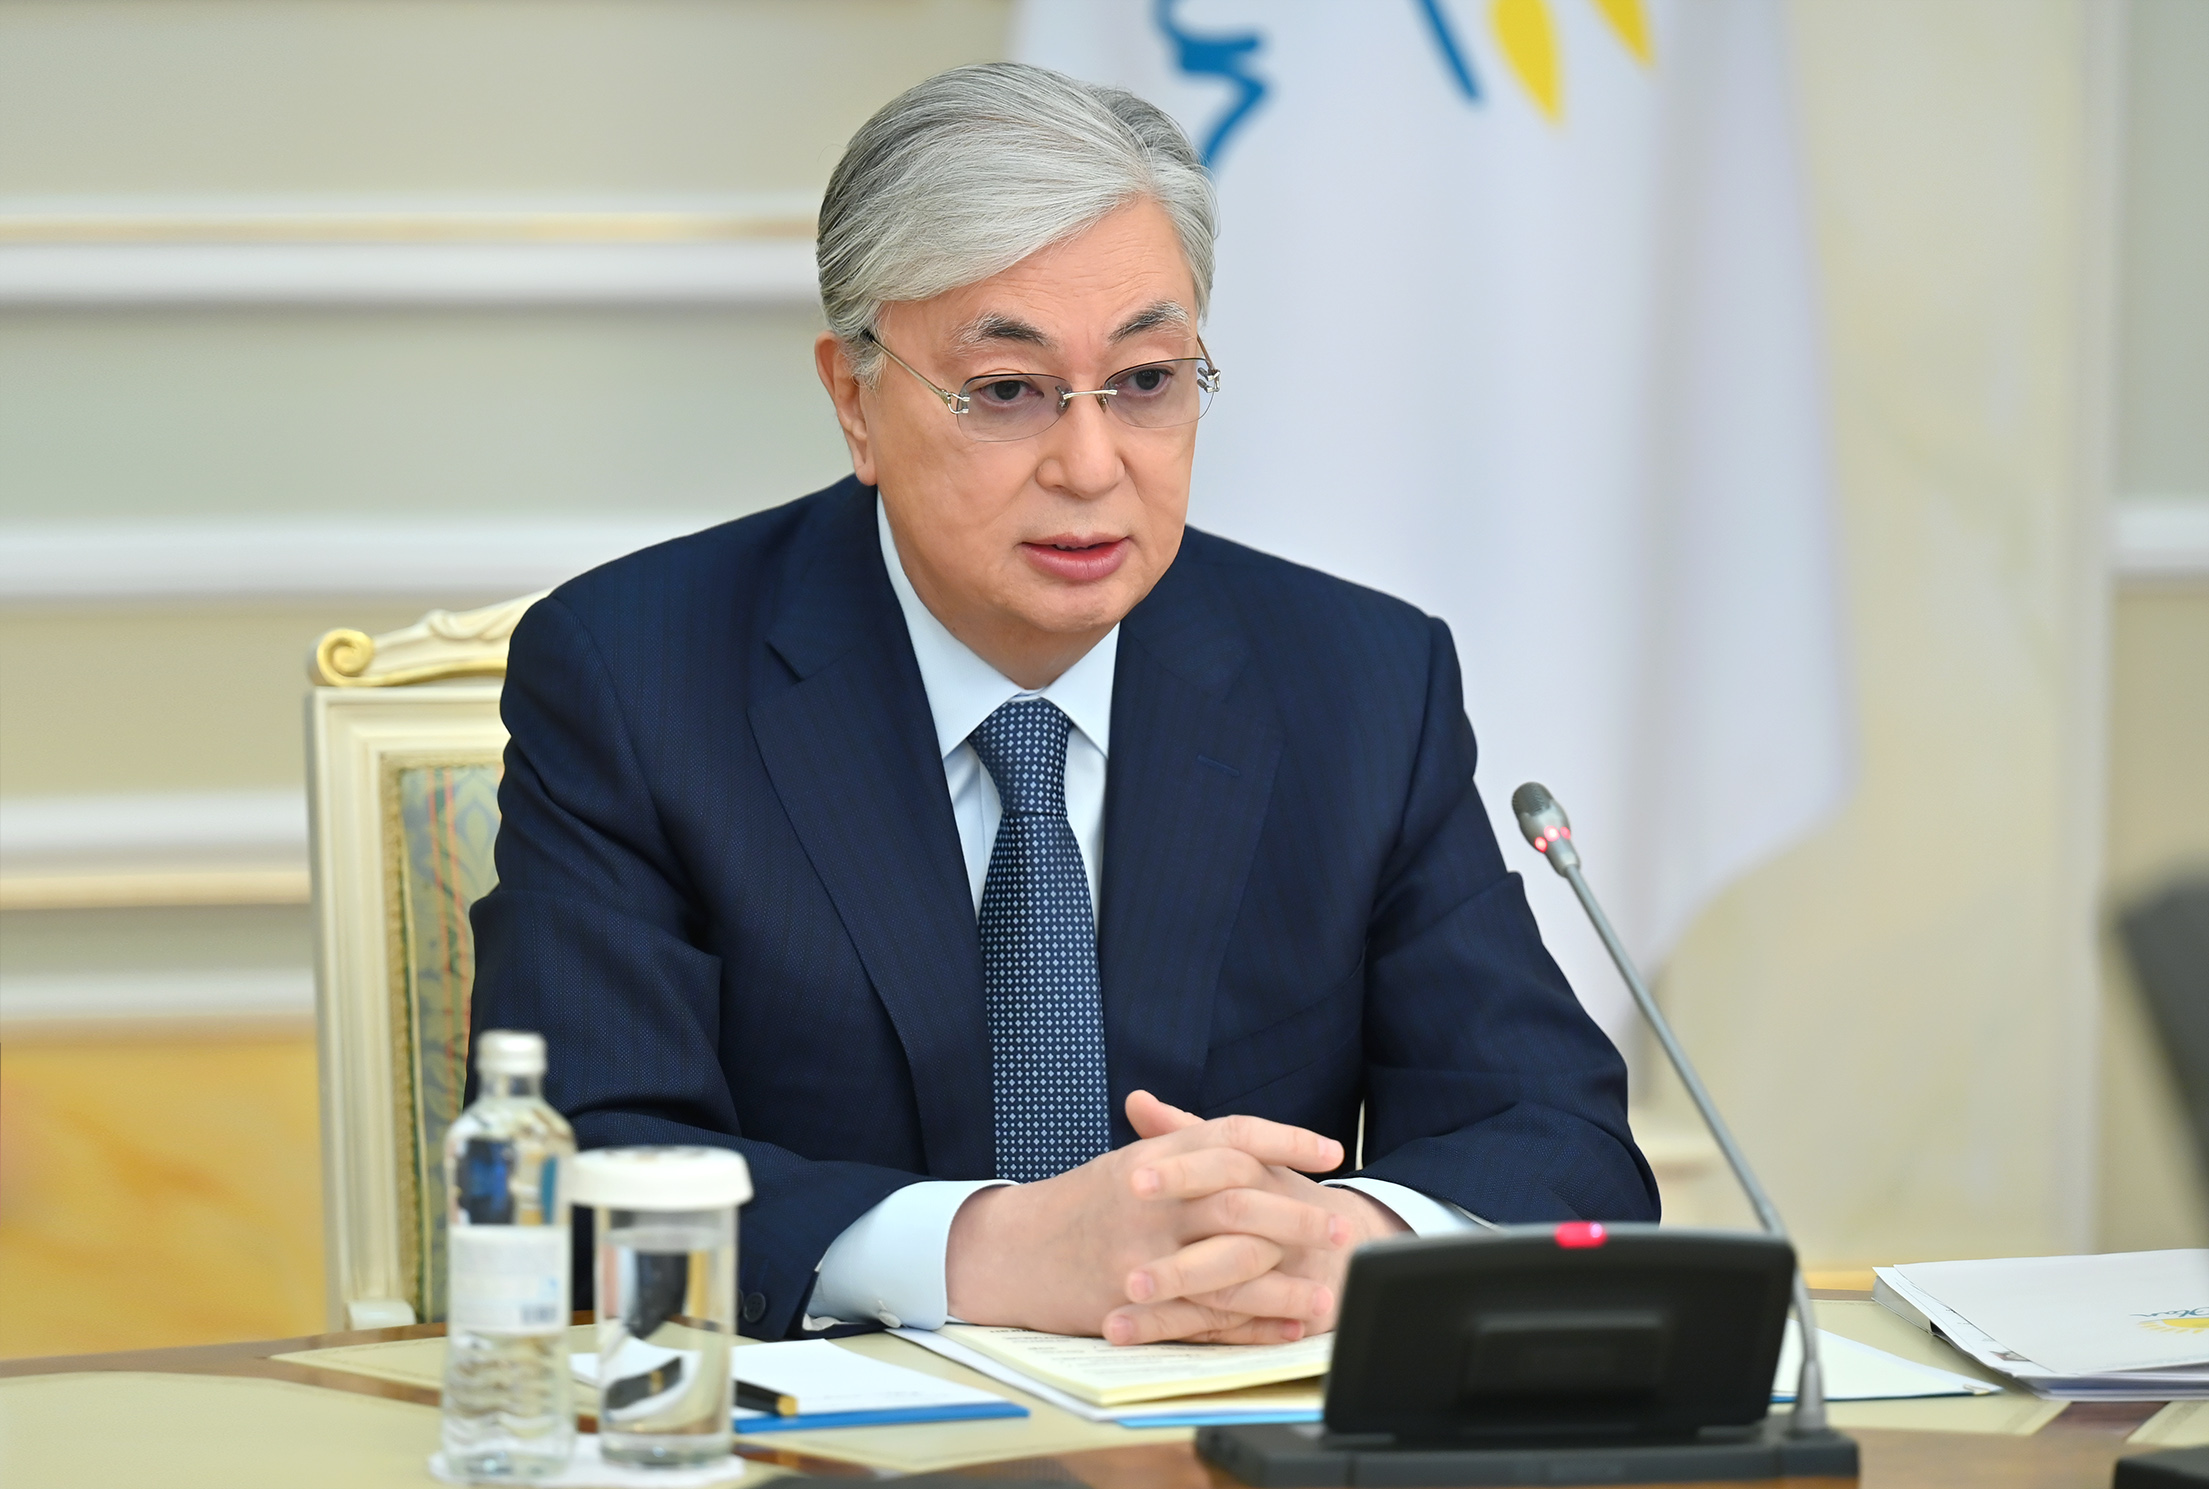 President Tokayev urges Russia and Ukraine to reach agreement through negotiations, says Kazakhstan ready to provide mediation, if needed